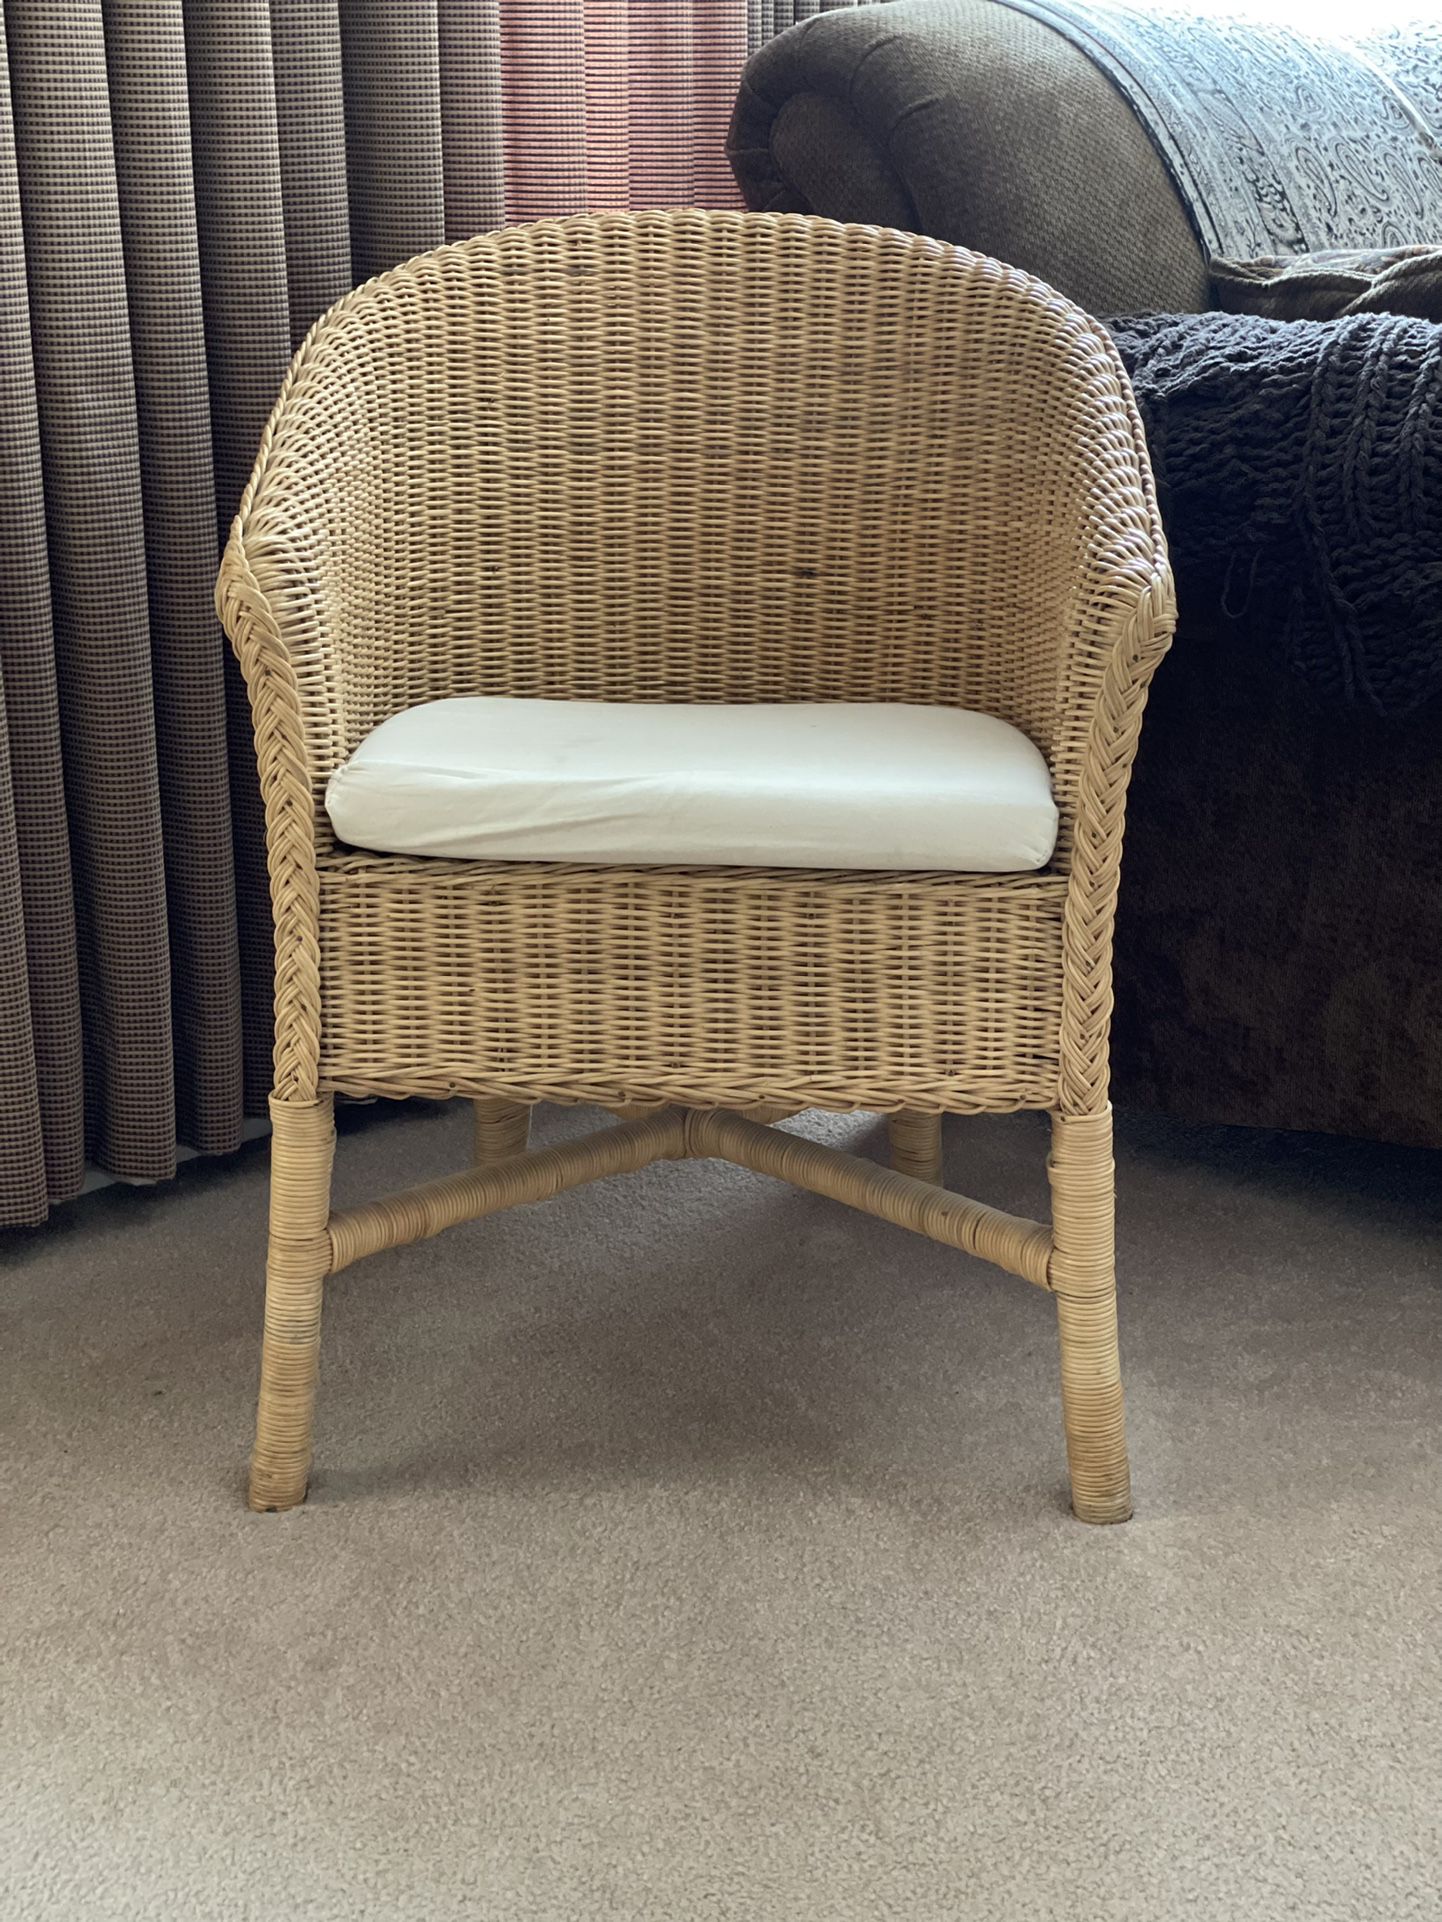 Gorgeous wicker indoor wicker chair with Cushion